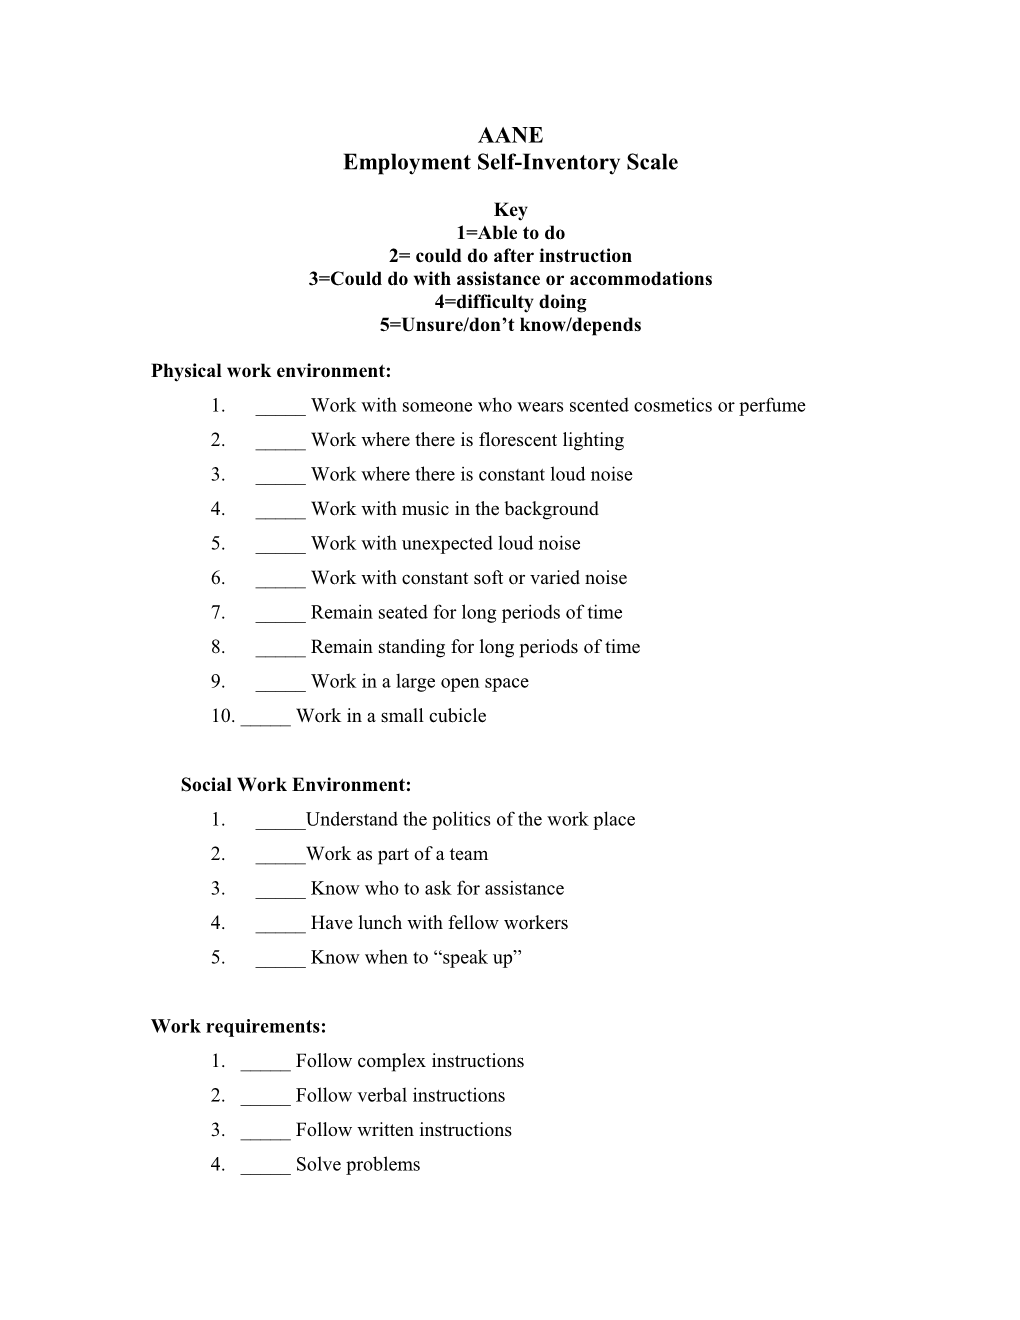 Employment Self-Inventory Scale